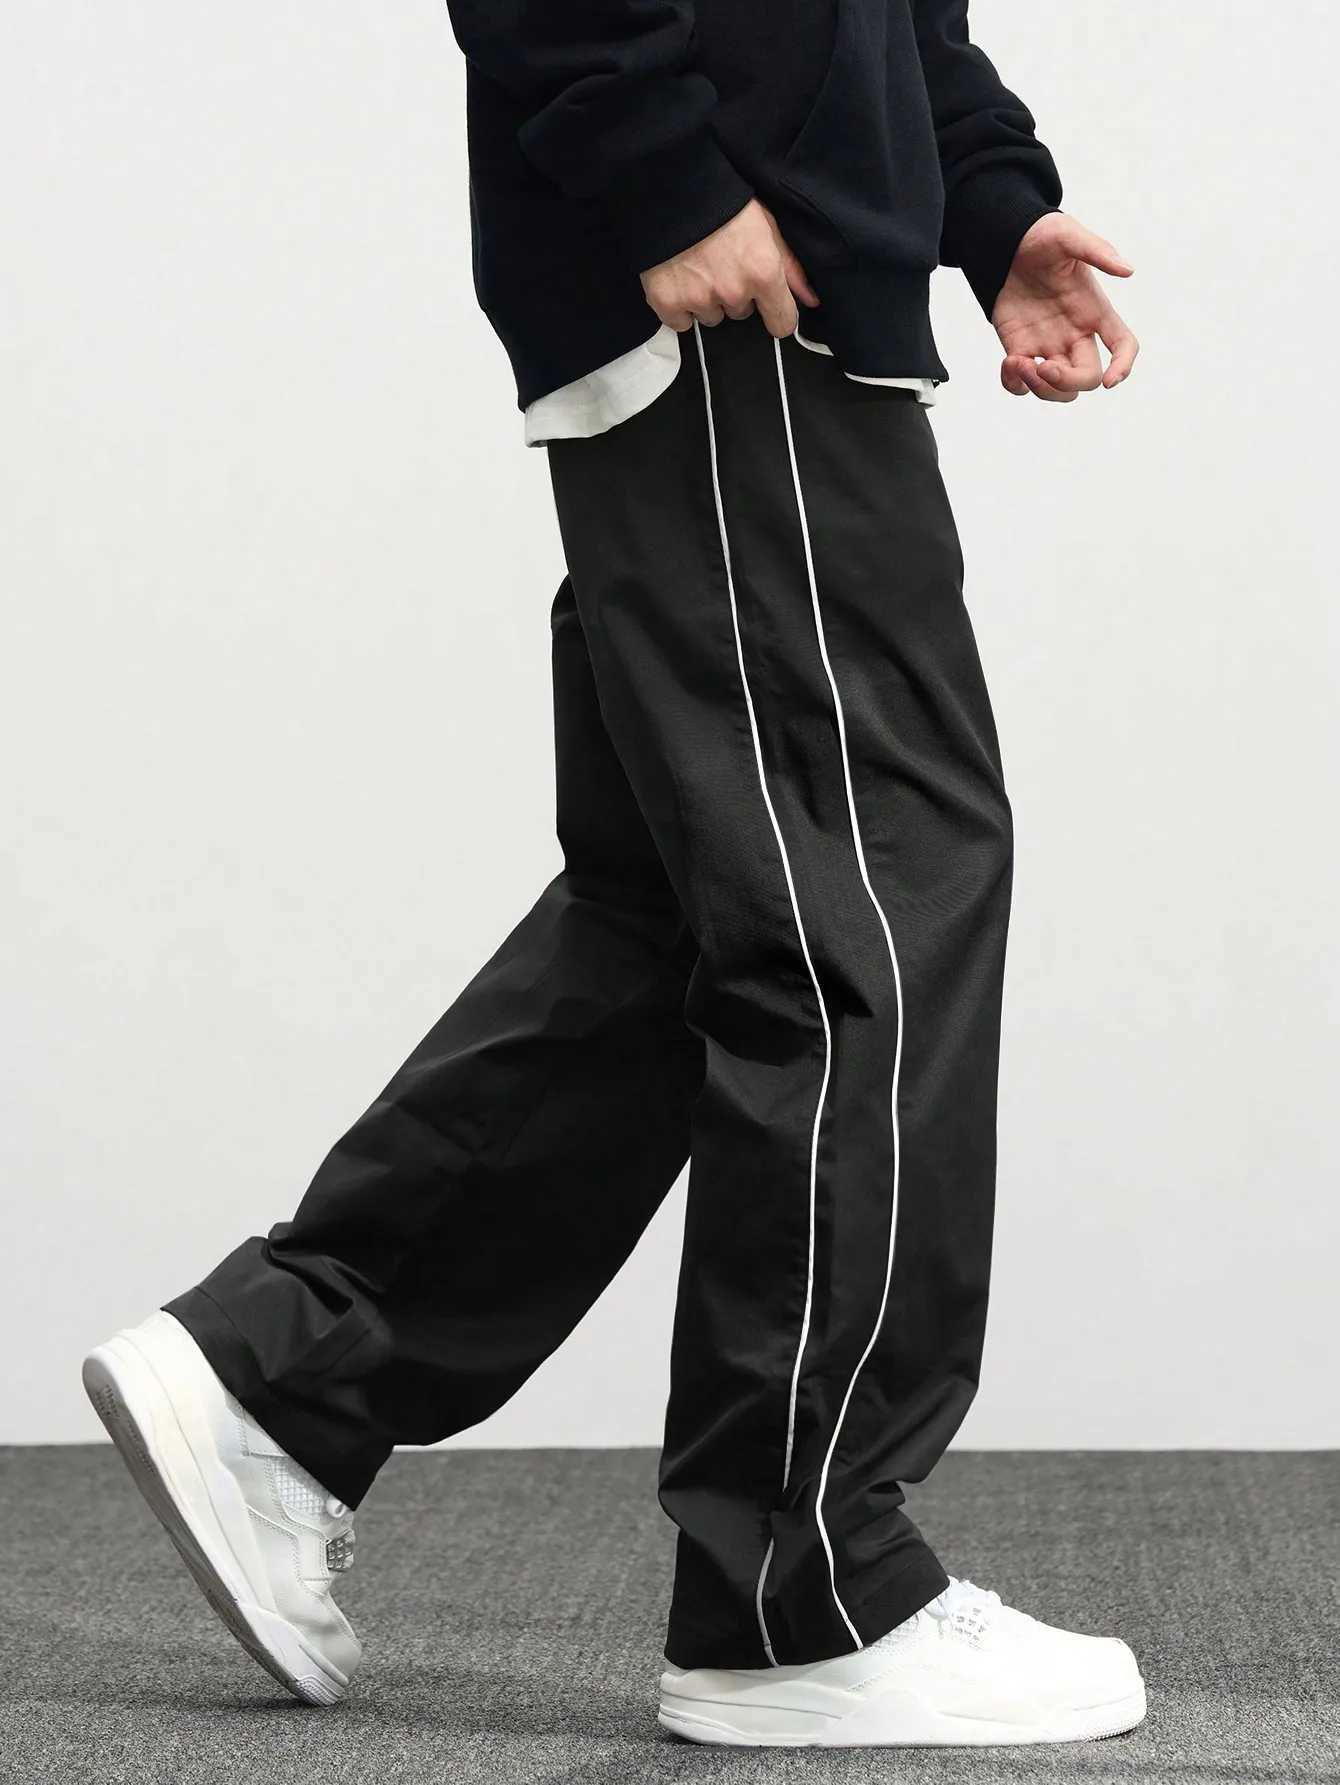 Men's Pants Mens casual cotton pants mens loose fitting pants with side pockets Trousers for Street Everyday Jogger OutL2404